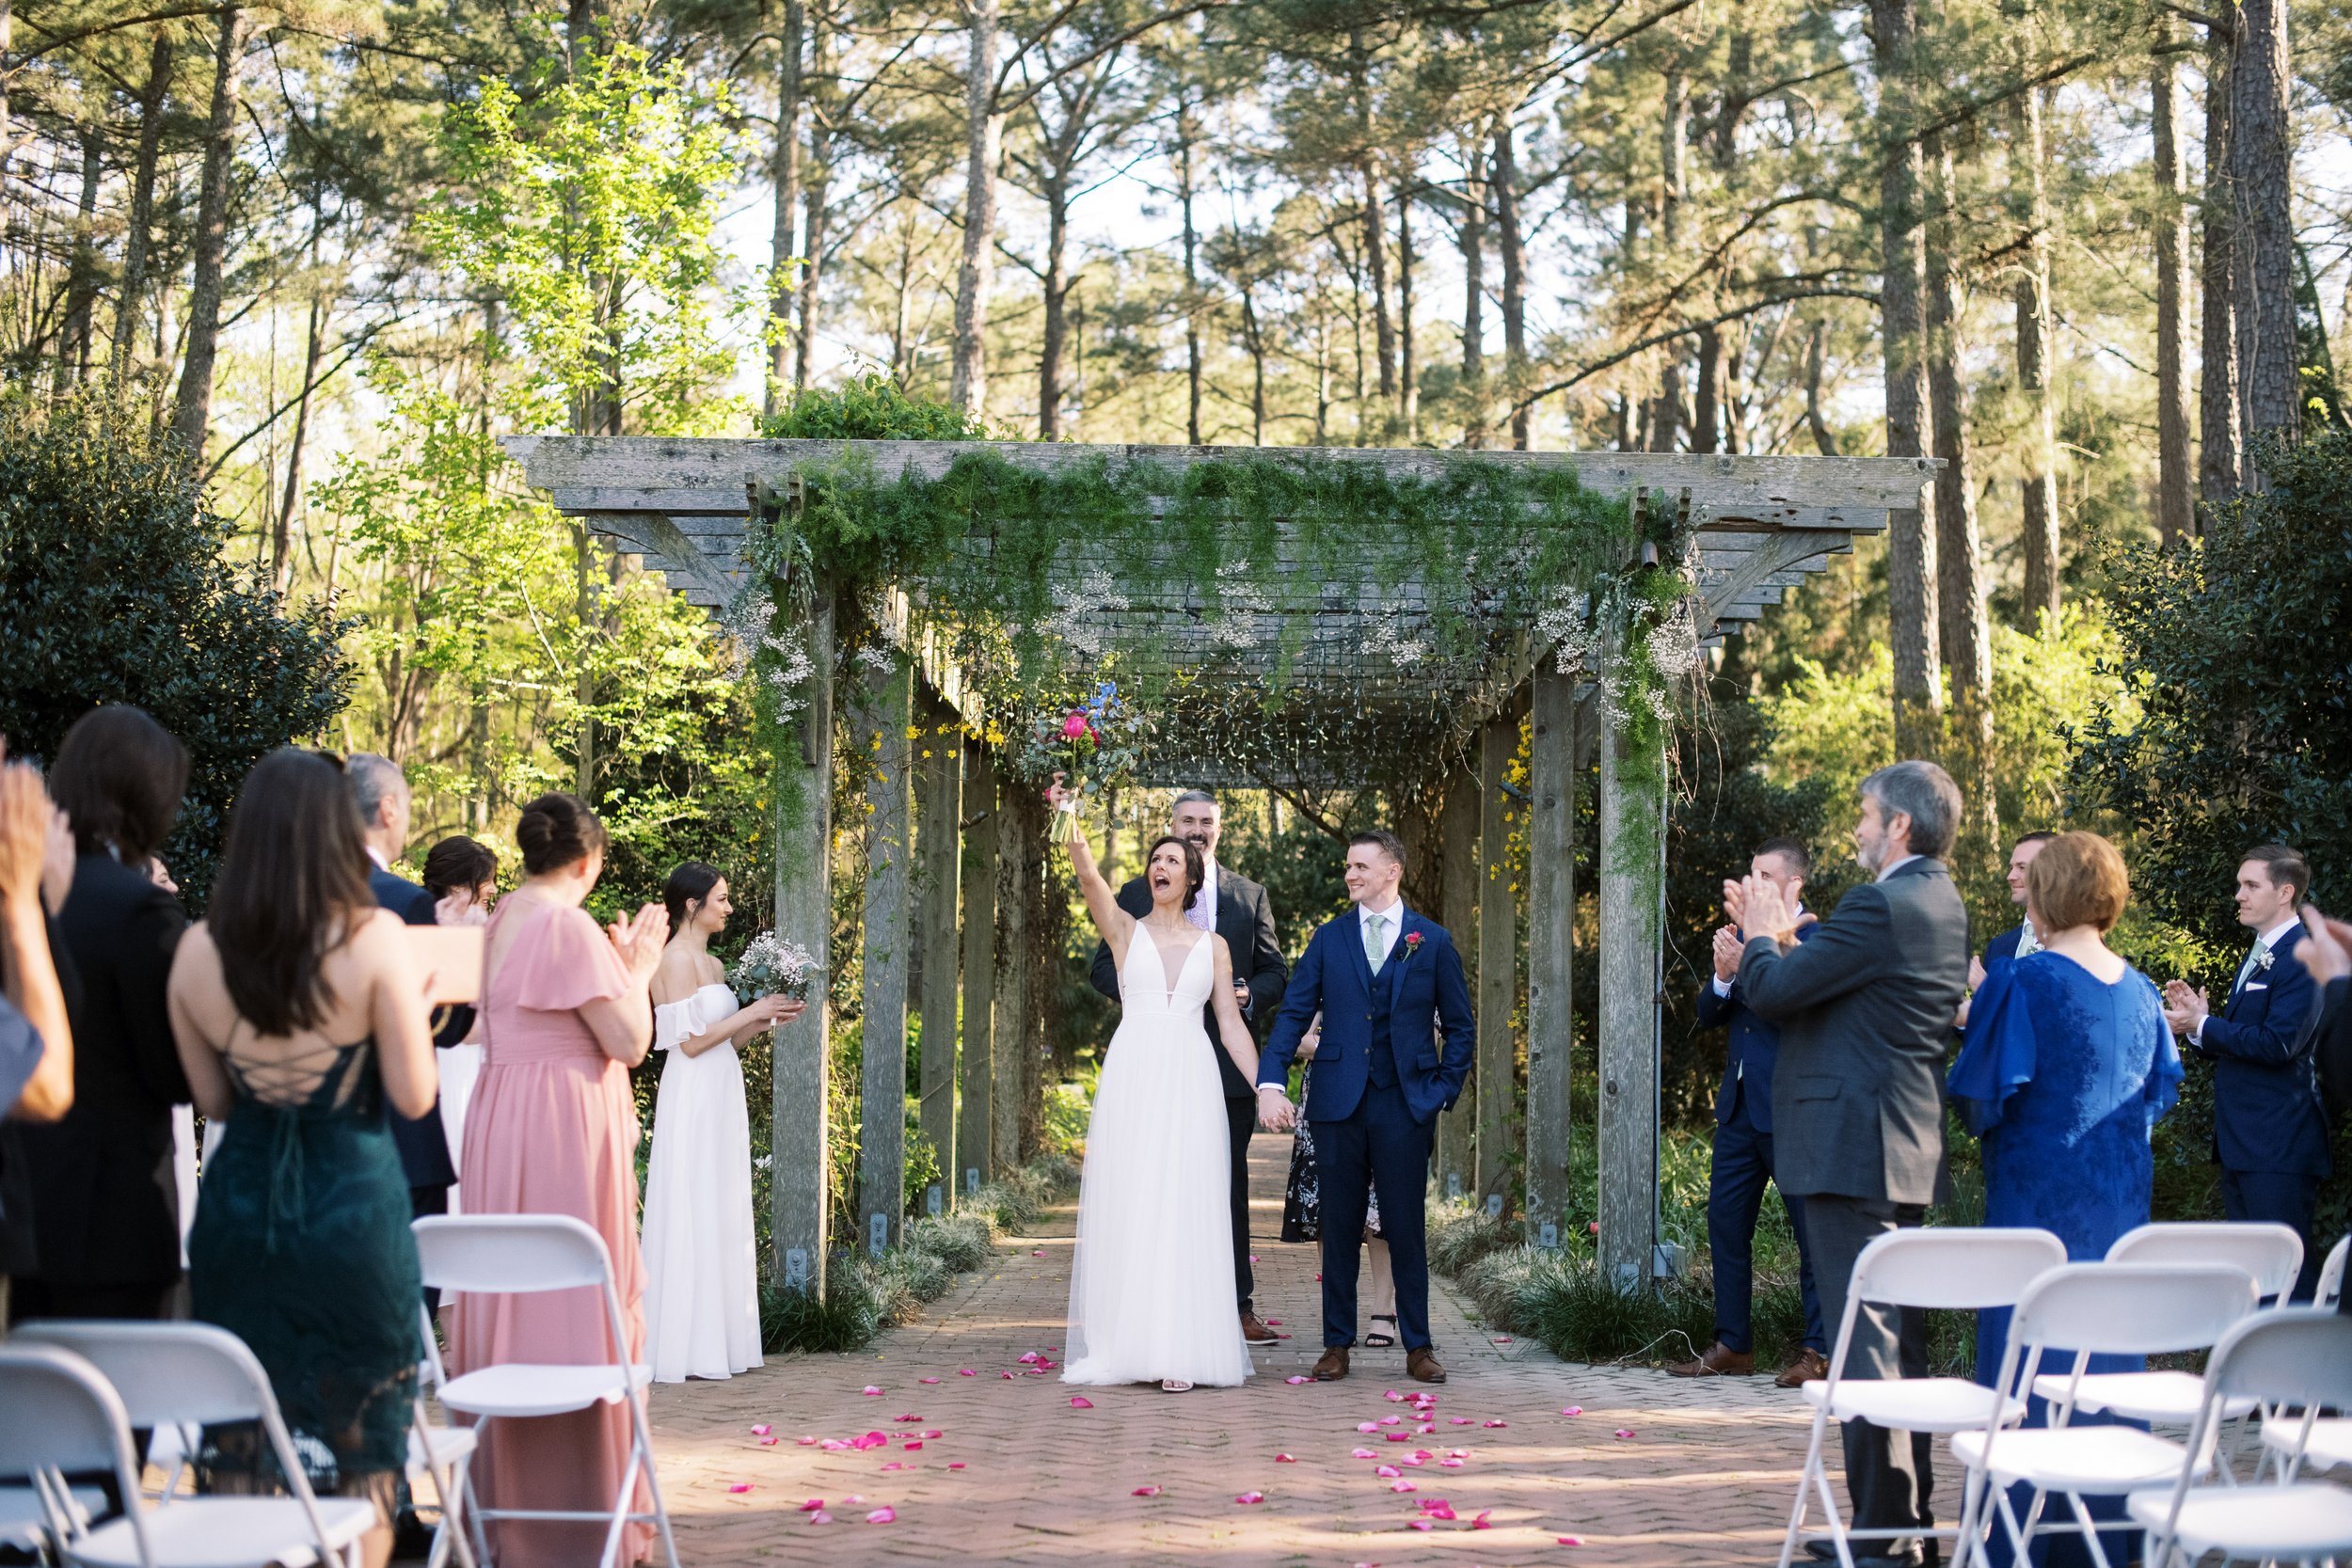  Post Ceremony Cheer Bride Groom Cape Fear Botanical Garden Wedding Fancy This Photography